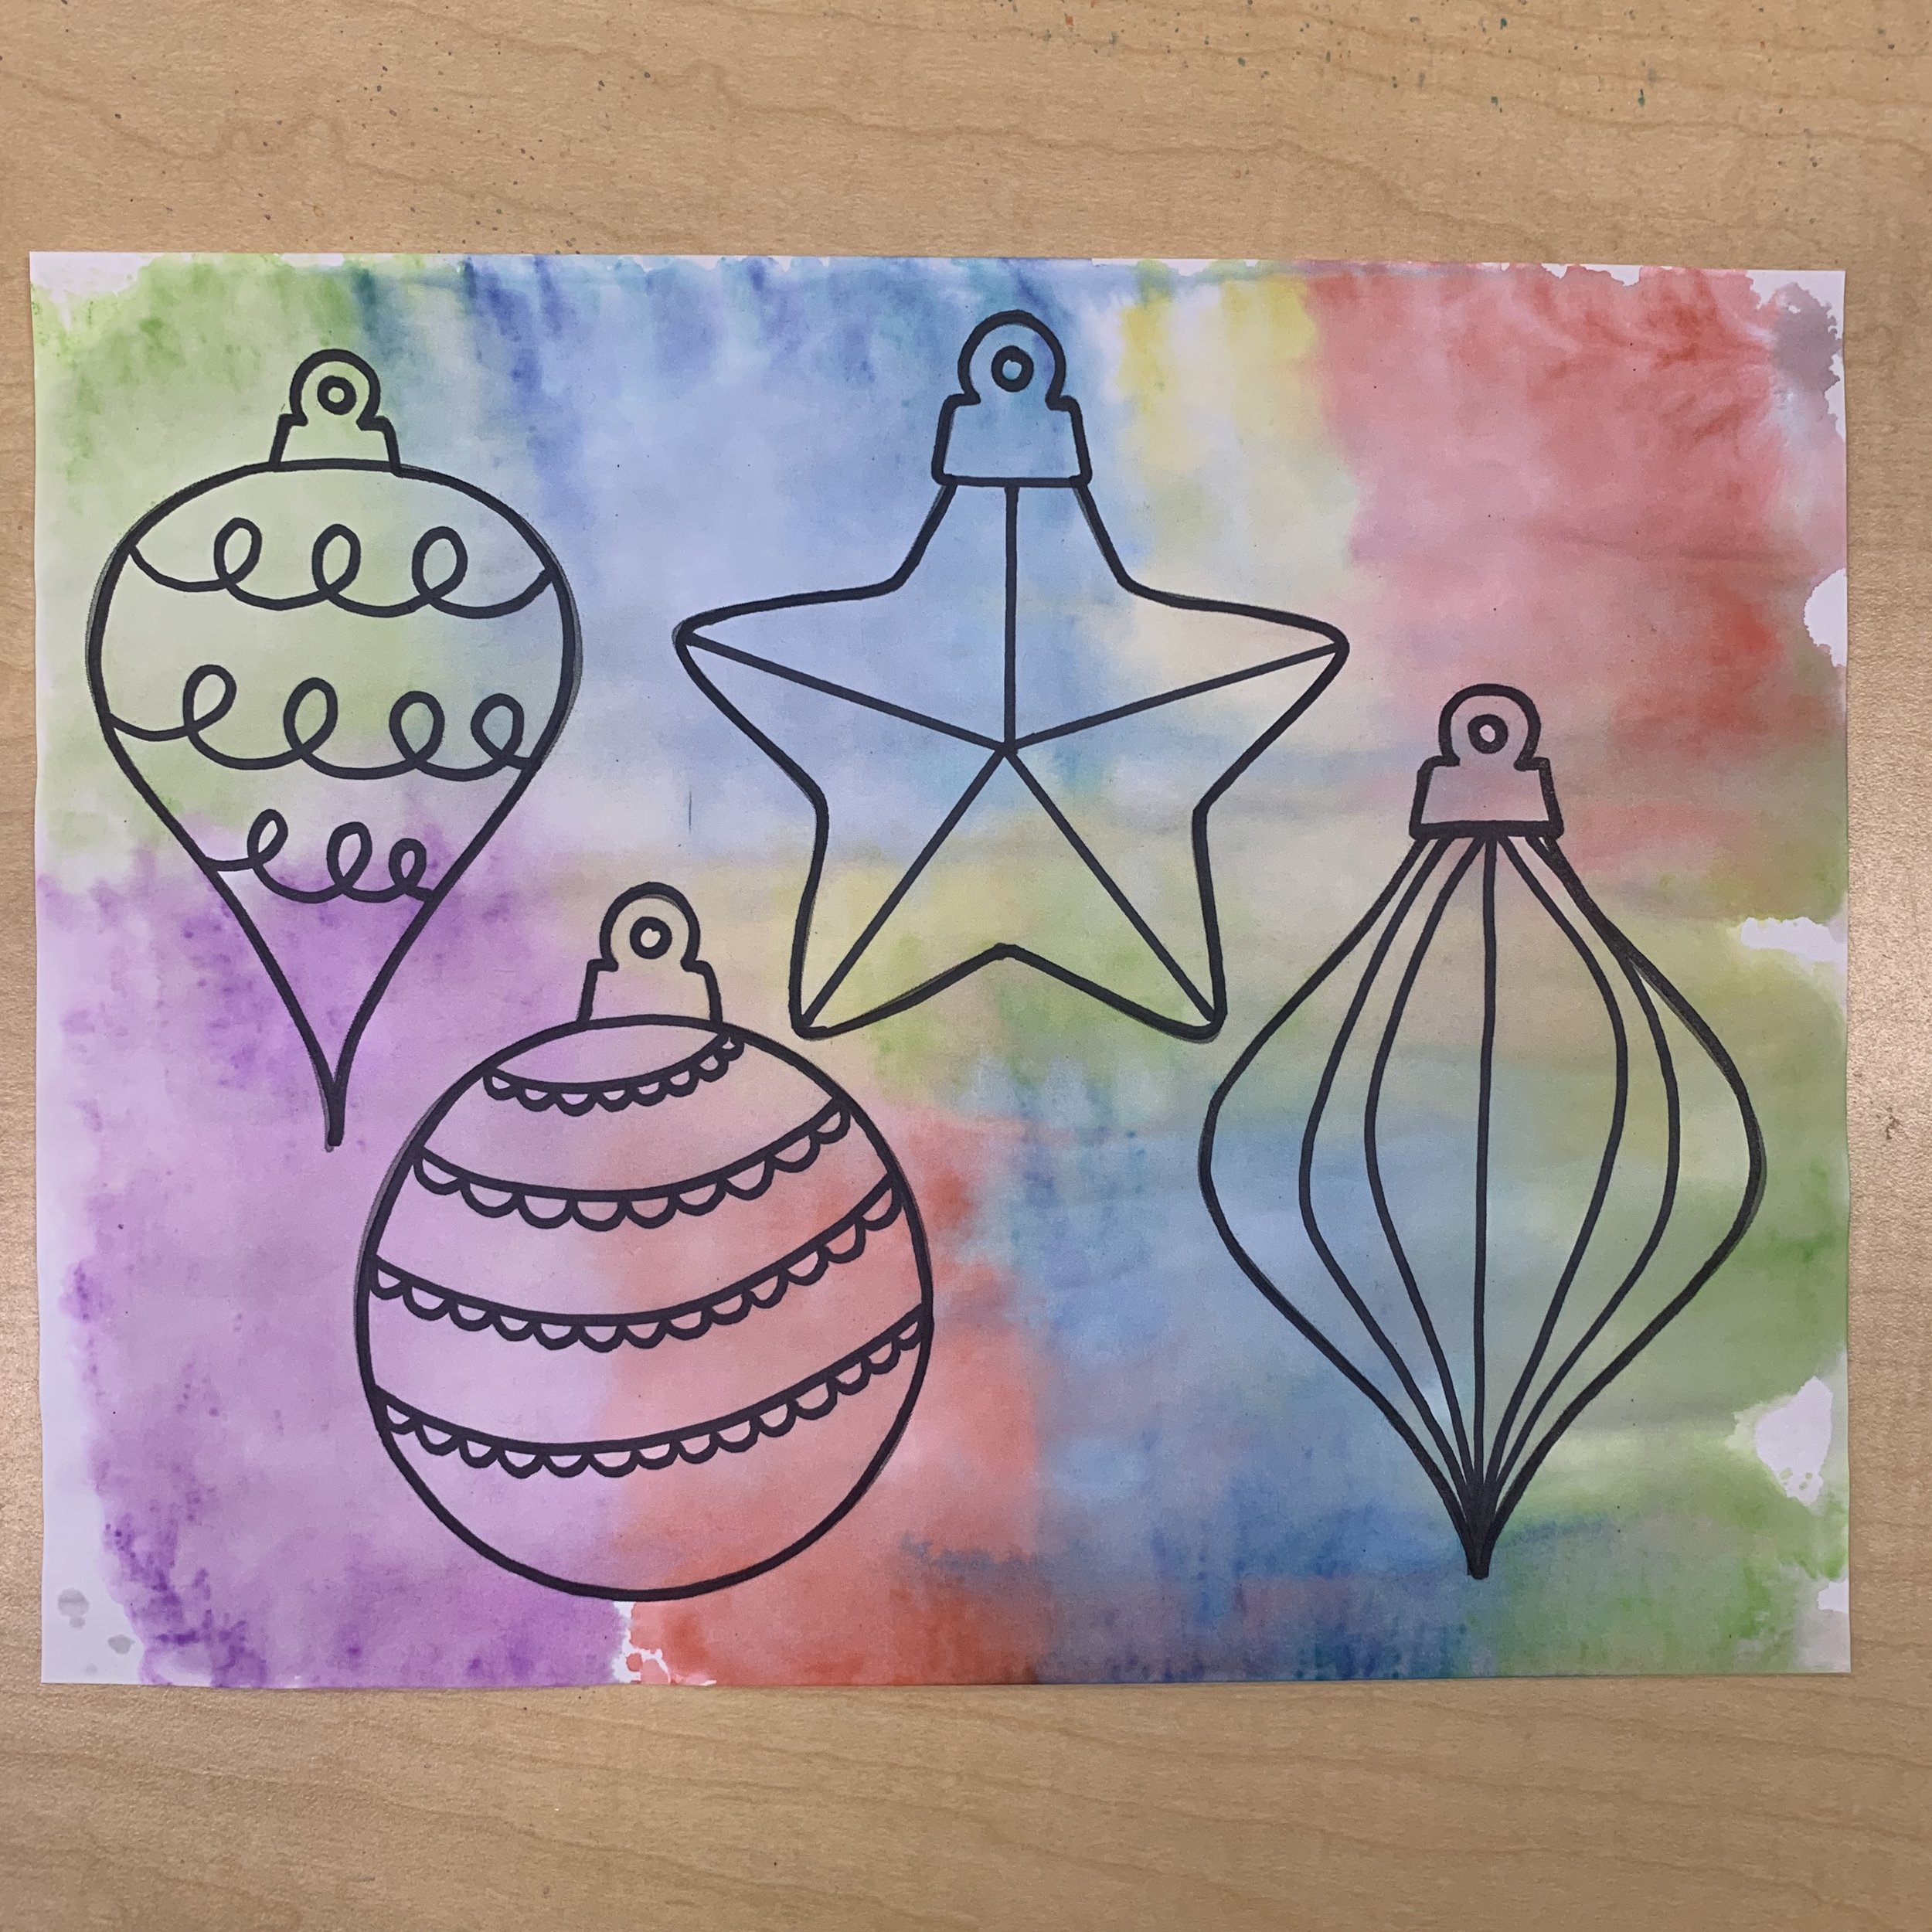 Holiday Foil Art Craft for the Family - HubPages